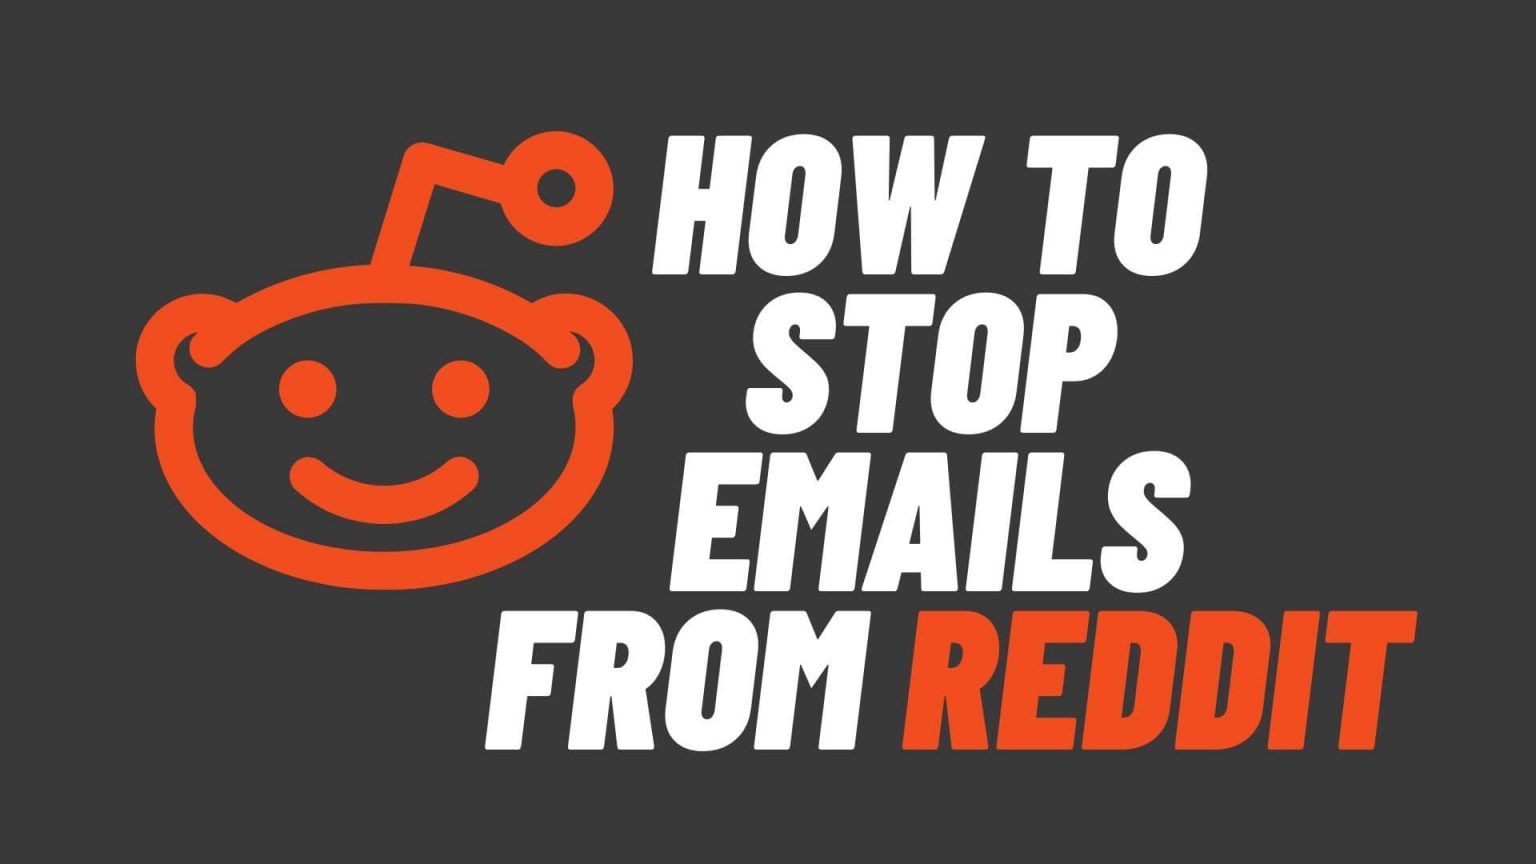 How To Stop Emails From Reddit | Easy Steps